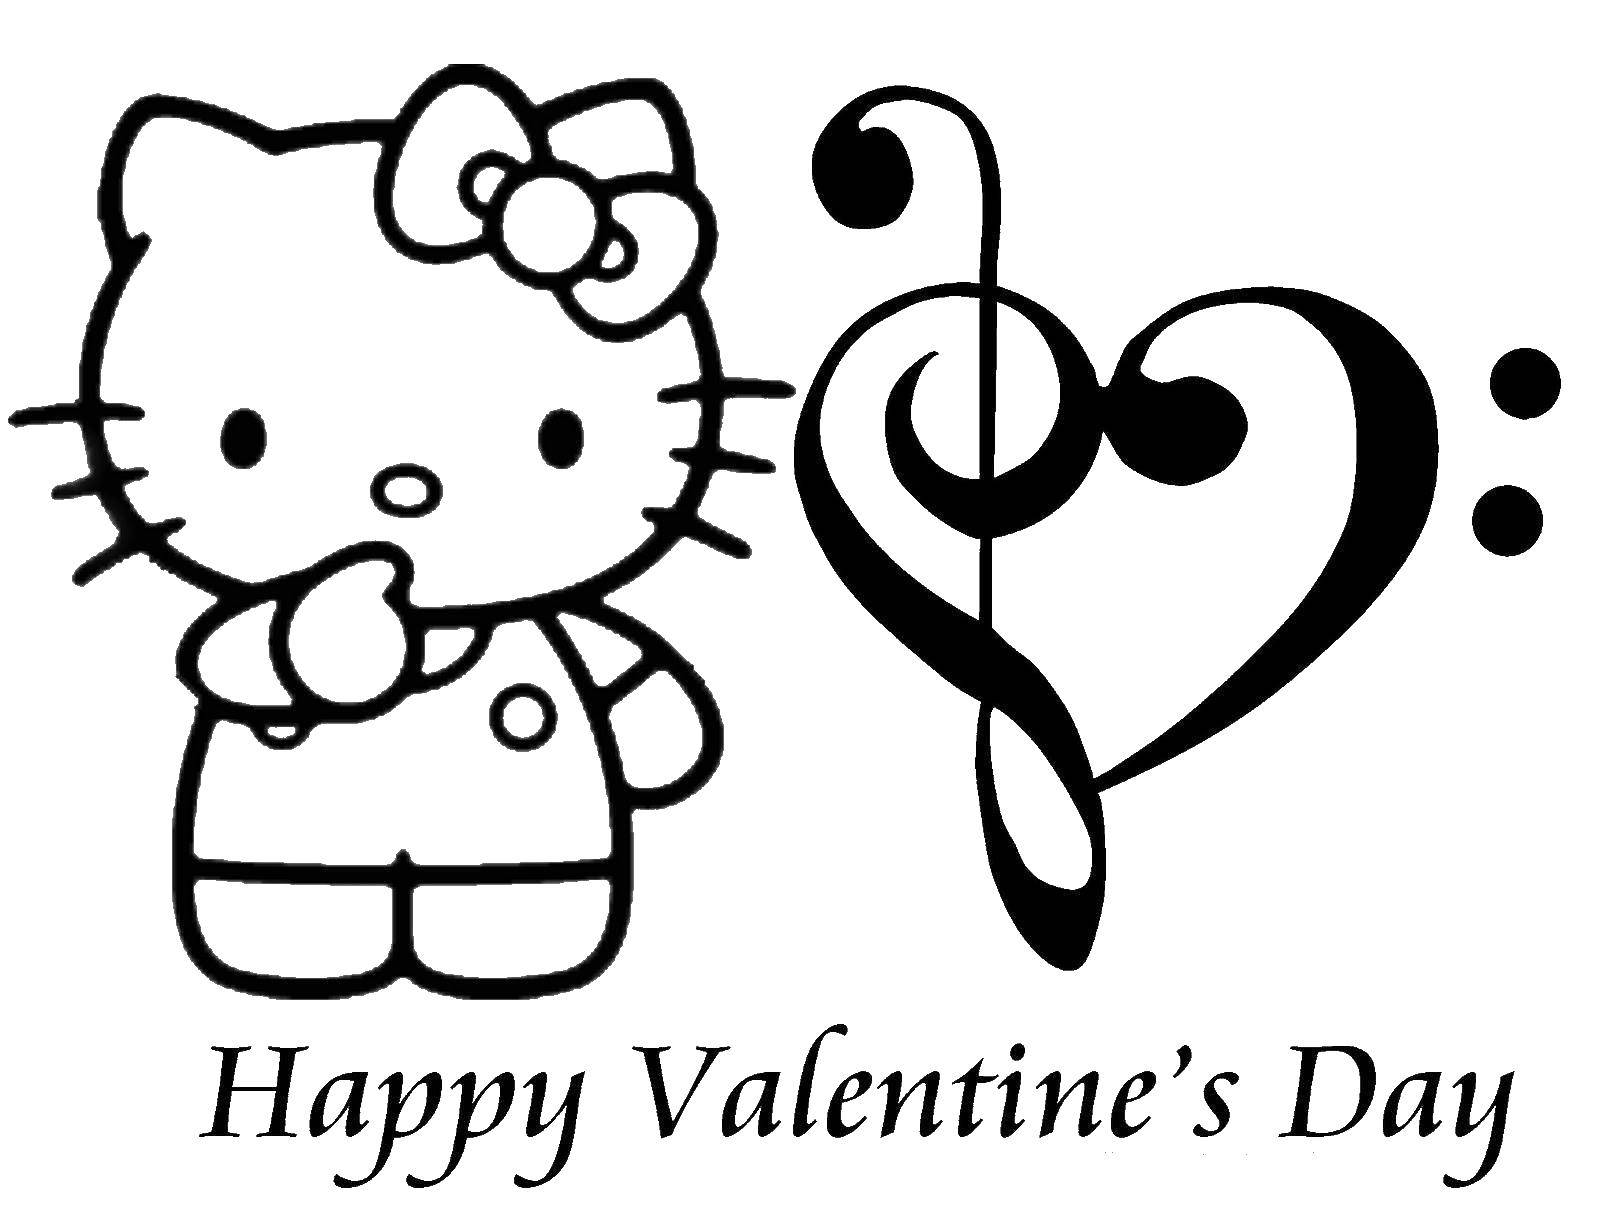 Coloring Kitty happy Valentines day. Category Valentines day. Tags:  Valentines day, greetings.